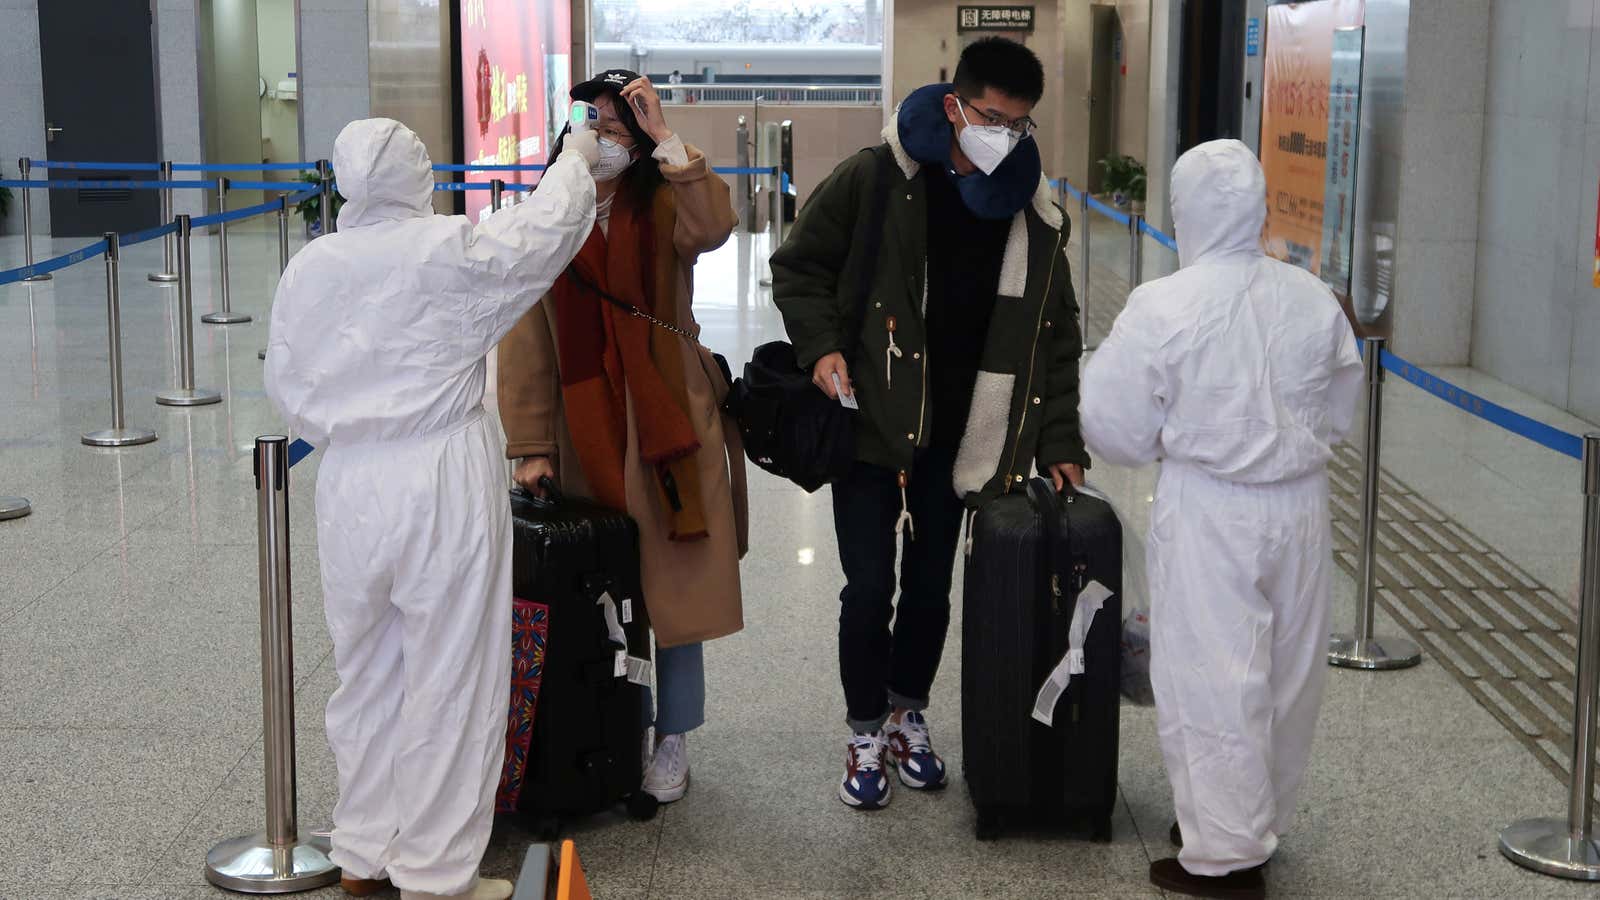 Workers in protective suits check the temperature of passengers arriving at a station in Xianning, a city bordering Wuhan in Hubei province, China Jan. 24, 2020.